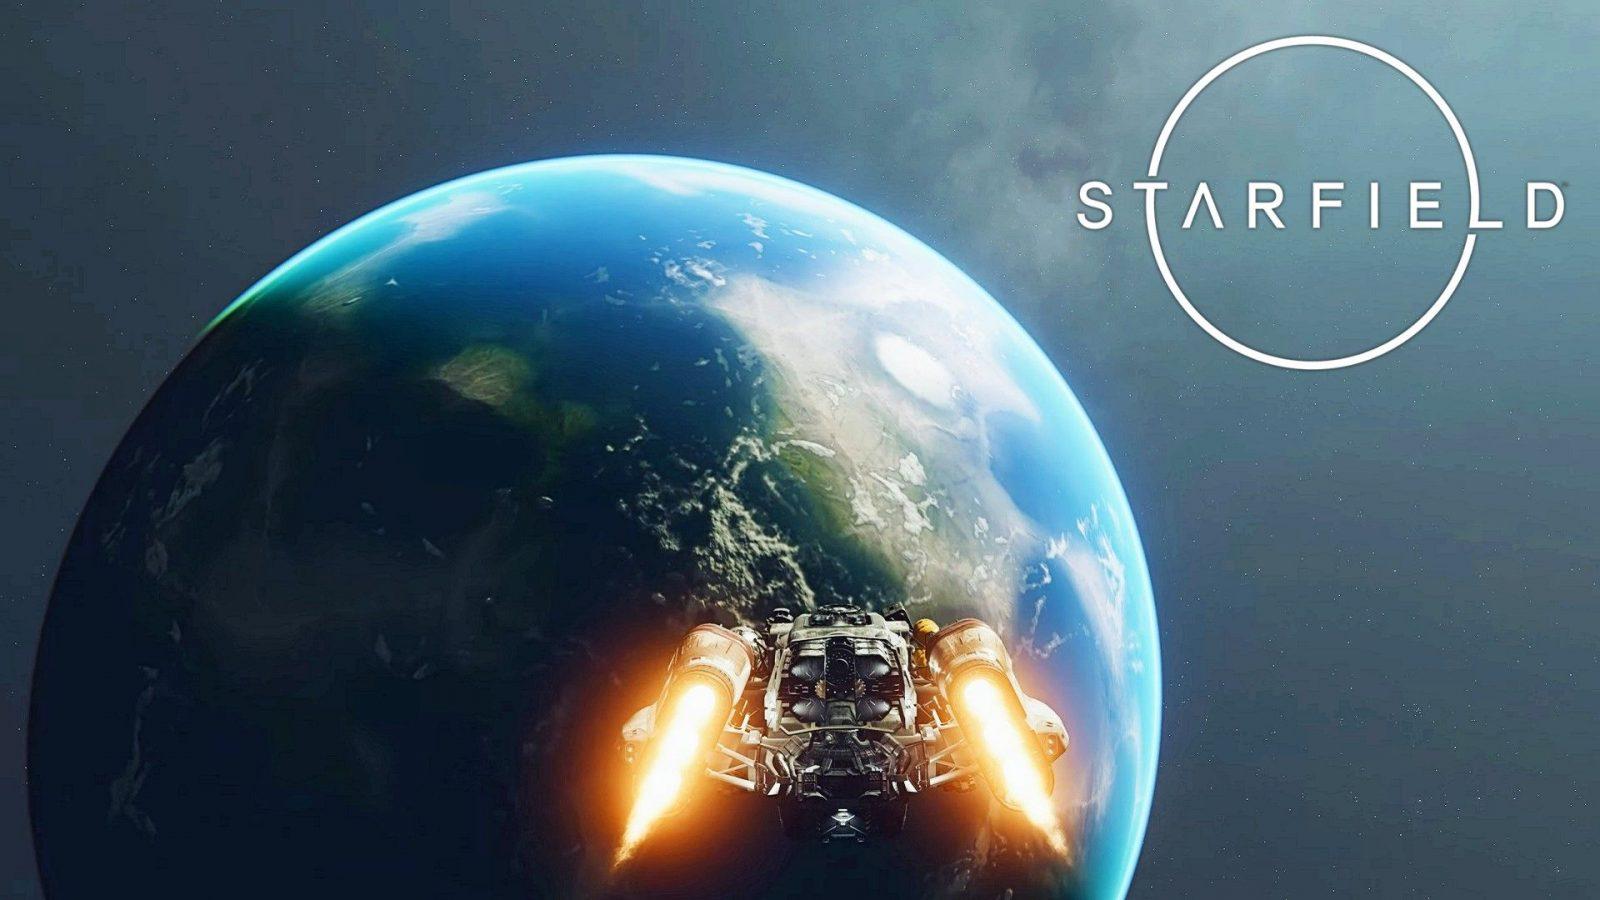 God of War writer flies to a planet in Starfield without the